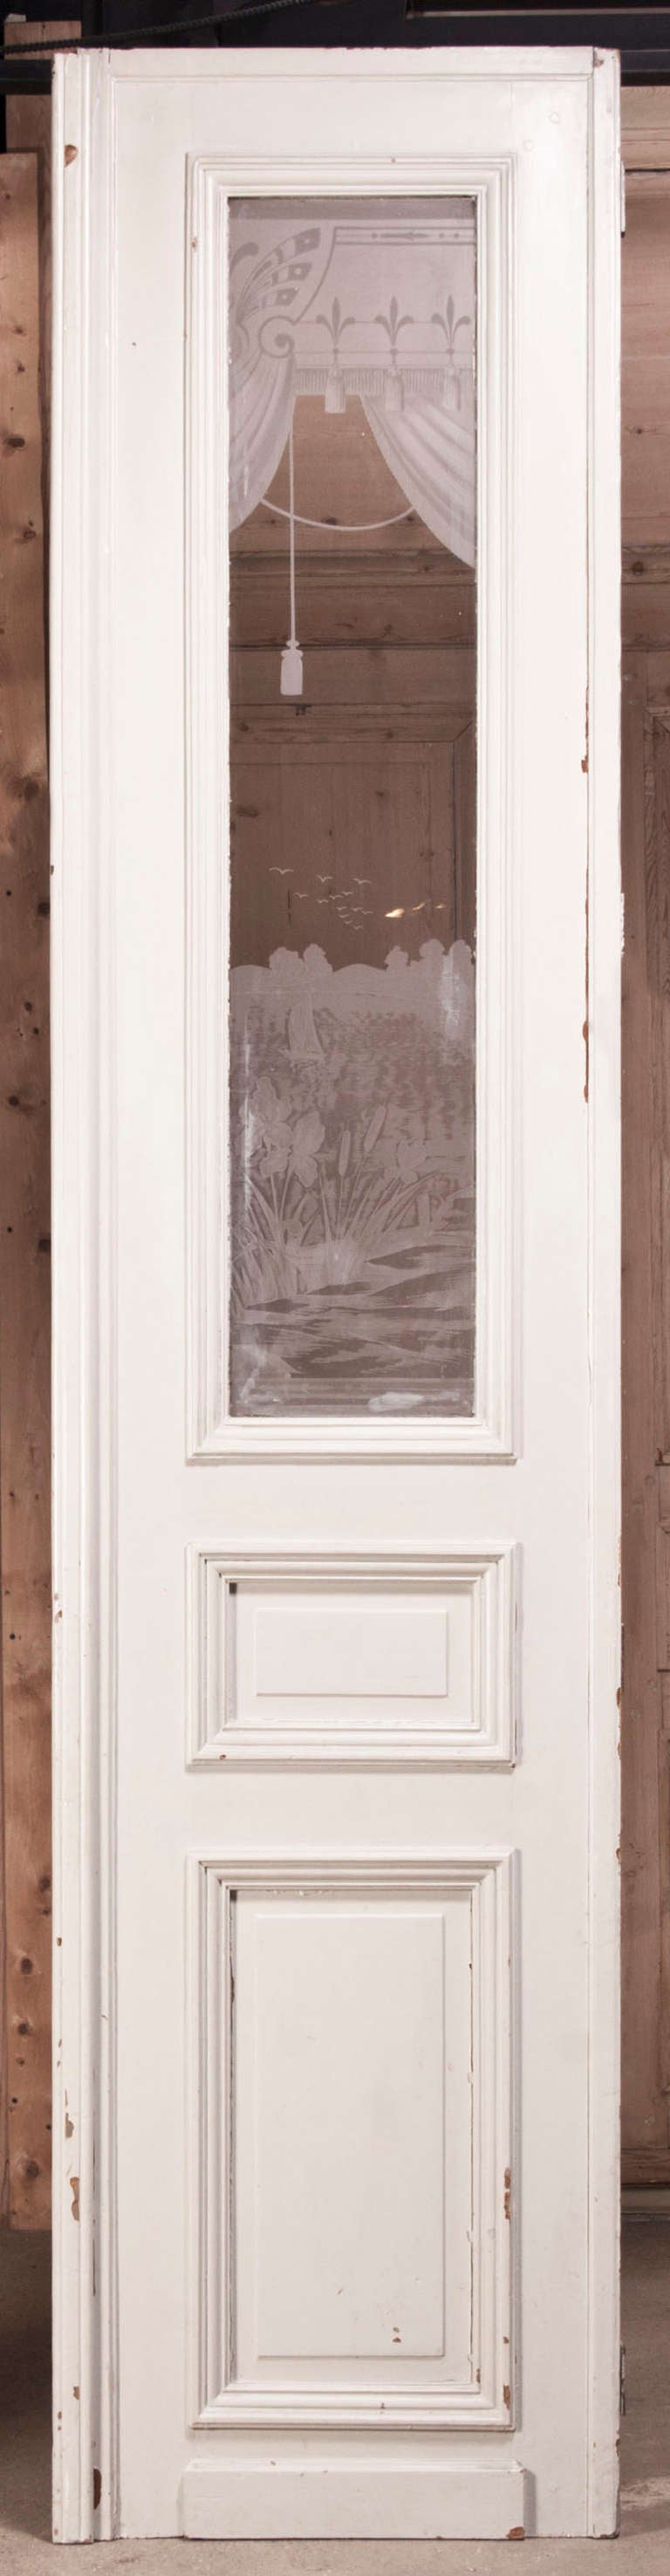 This remarkable set of four antique doors with etched glass cleverly depict a view through a window of a lush landscape framed by curtains, all etched directly into the glass to create a permanent record of the talents of the artist who created it!